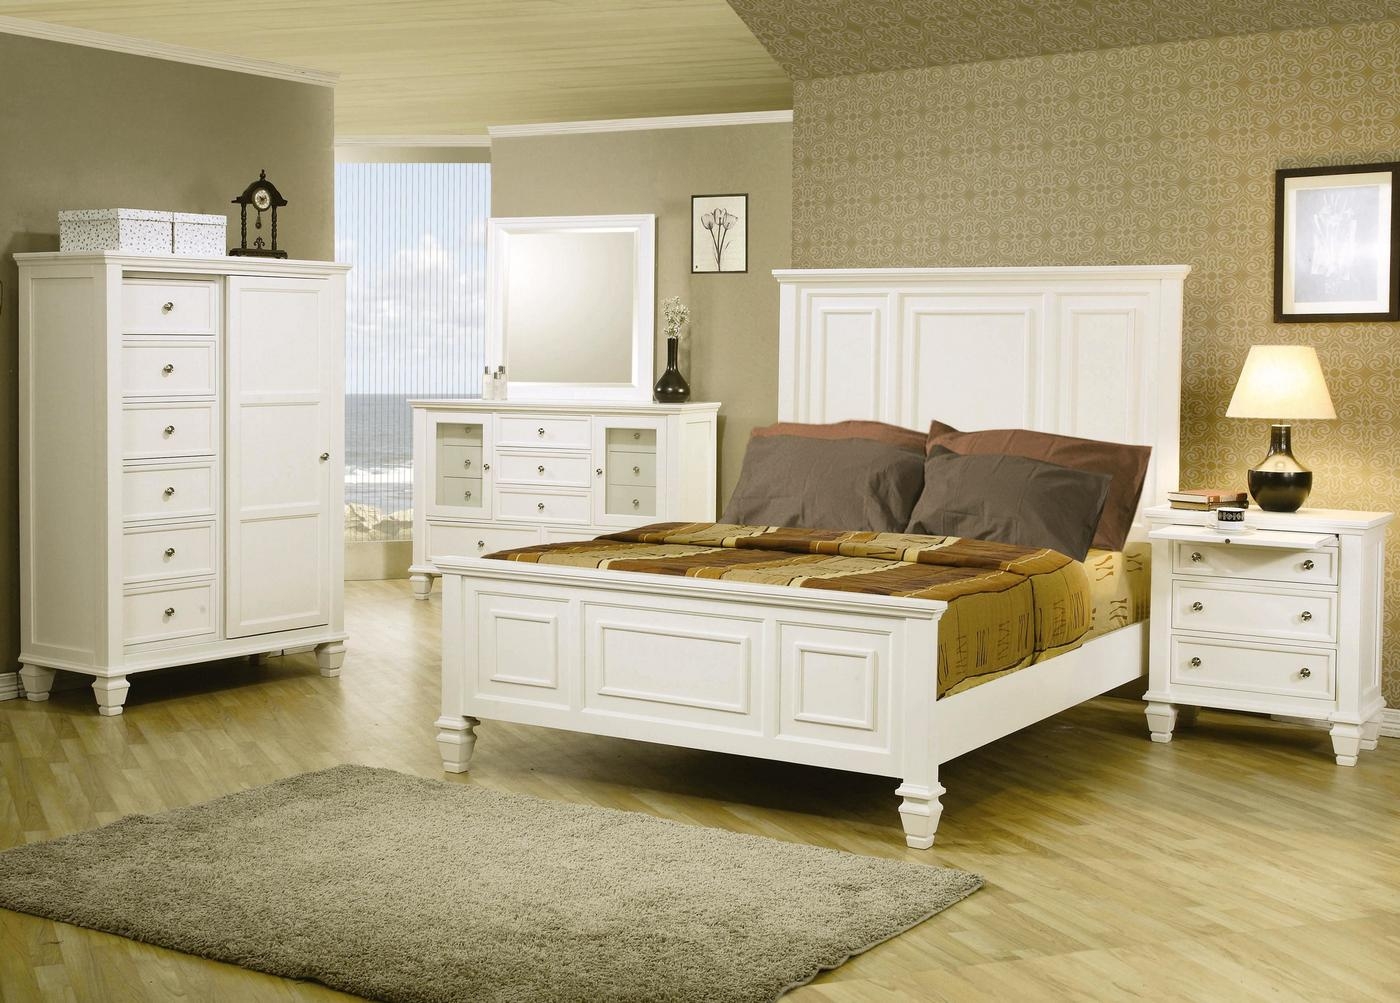 California King Size Bed Cape Cod Style in White Finish